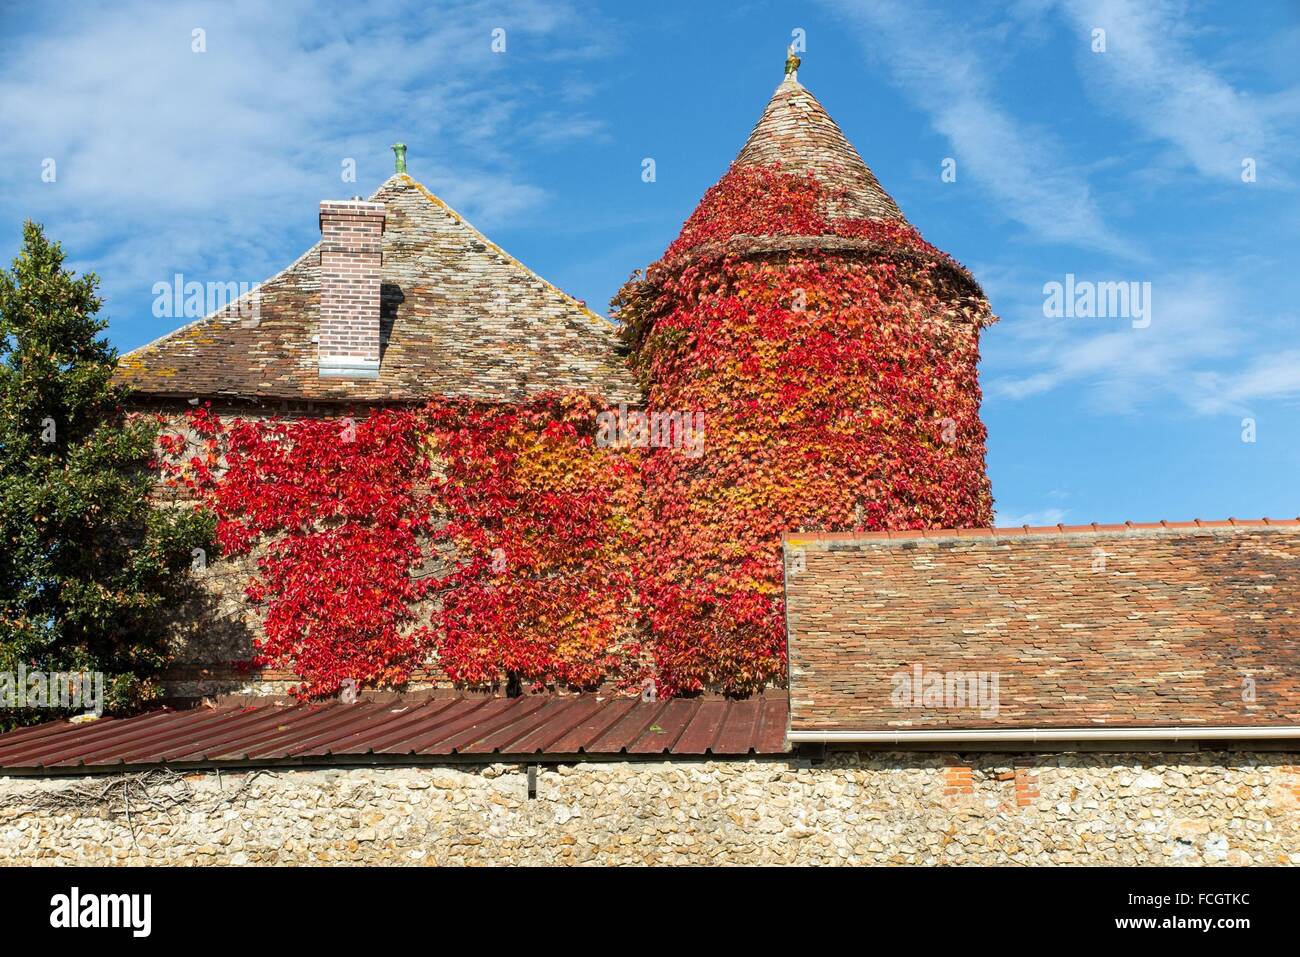 FARM BUILDING COVERED IN VIRGINIA CREEPER IN AUTUMN COLORS, FRANCE Stock Photo